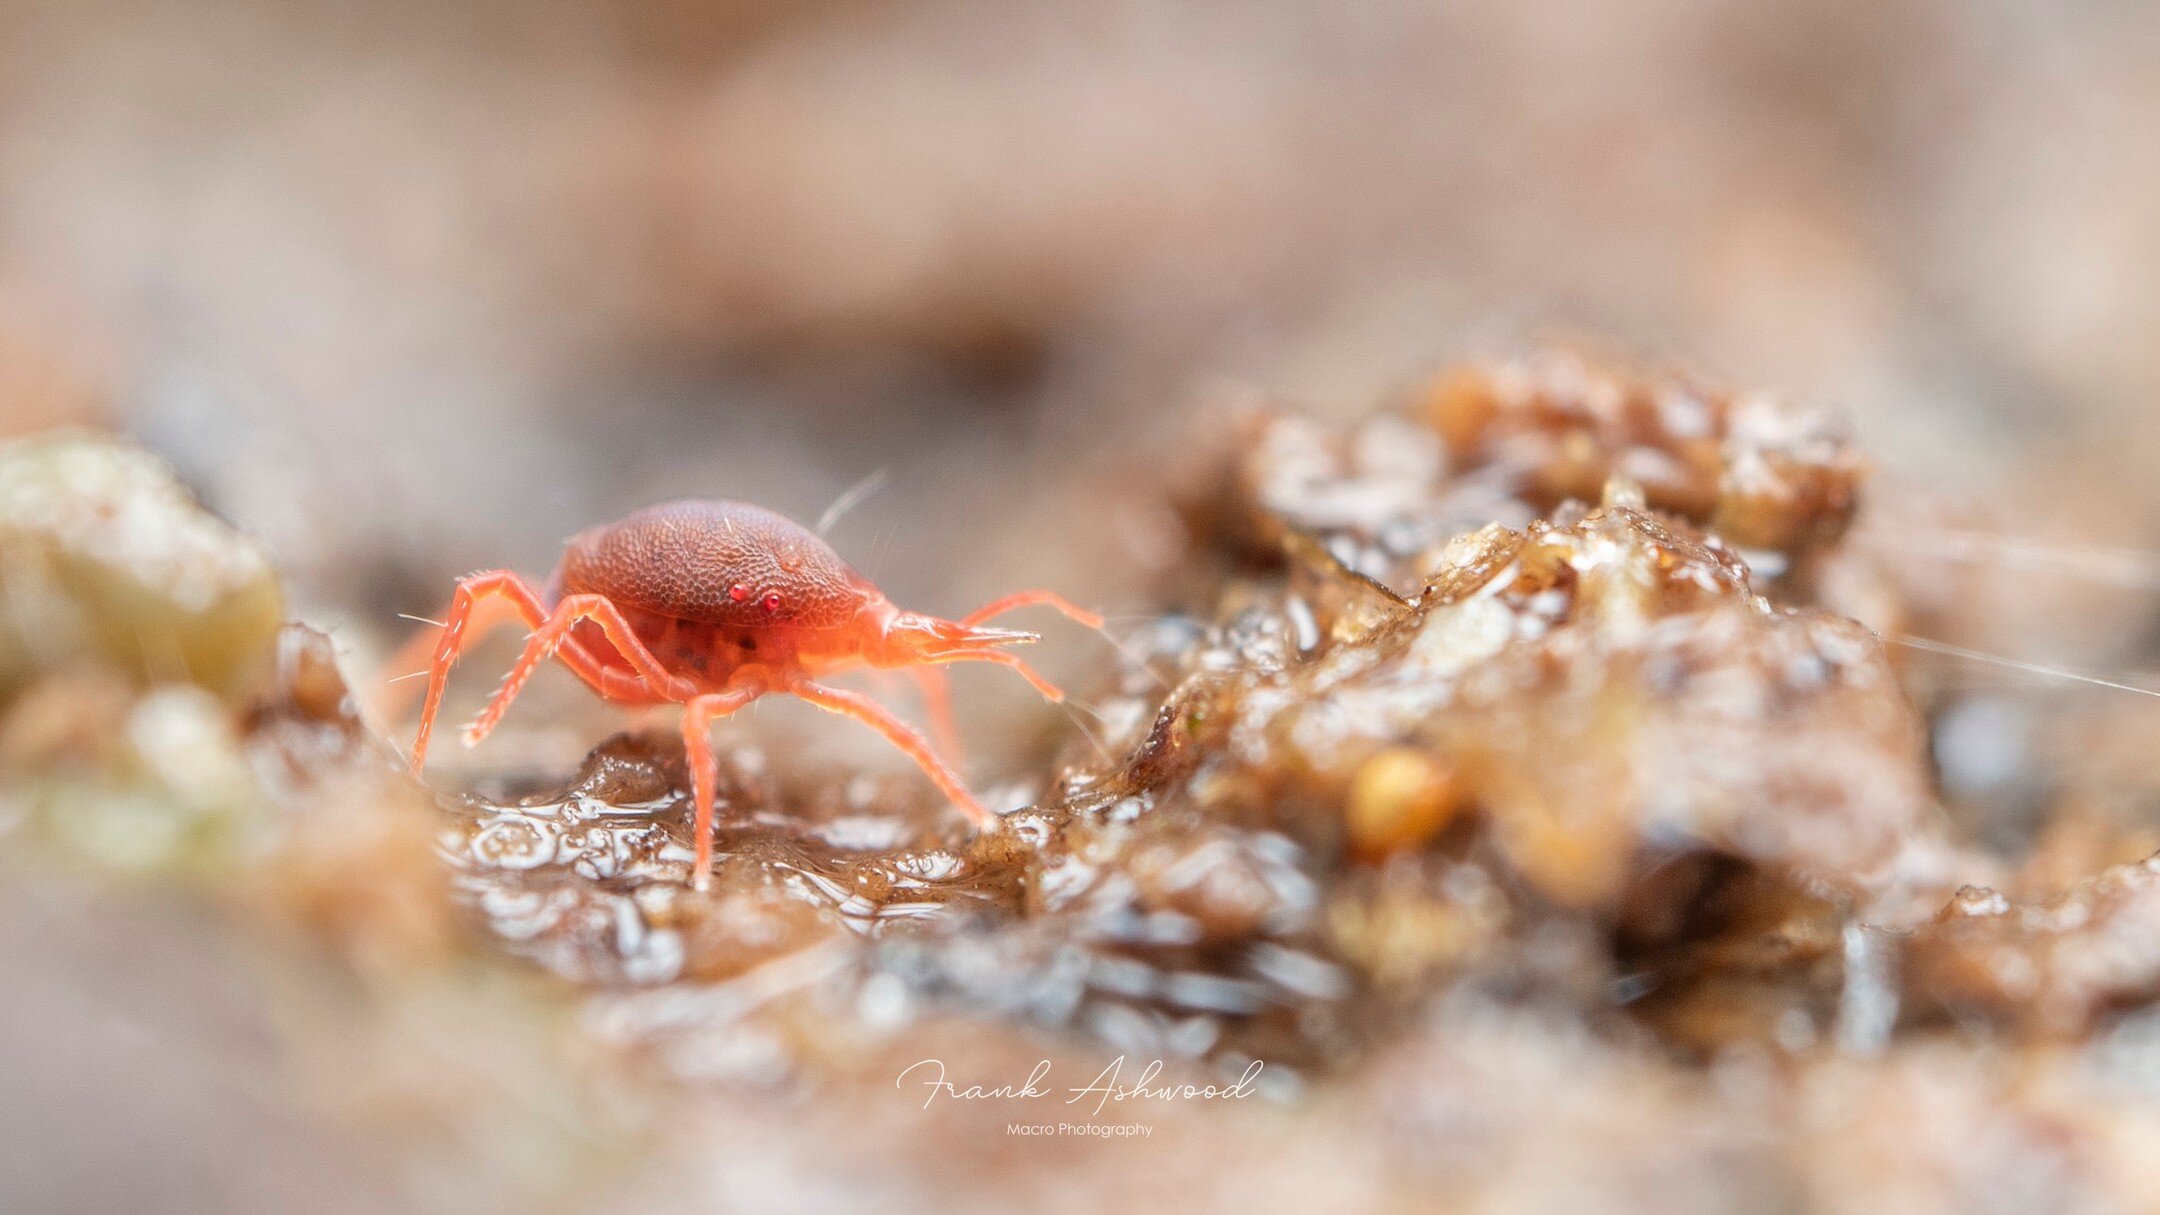 I'm getting #MiteMonday in early today, with this predatory 'snout' mite (family Bdellidae).

At only 2 mm in size, it's astonishing just how intricate the details can be on these creatures. I've not seen such scale-like armour and piercing red eyes 